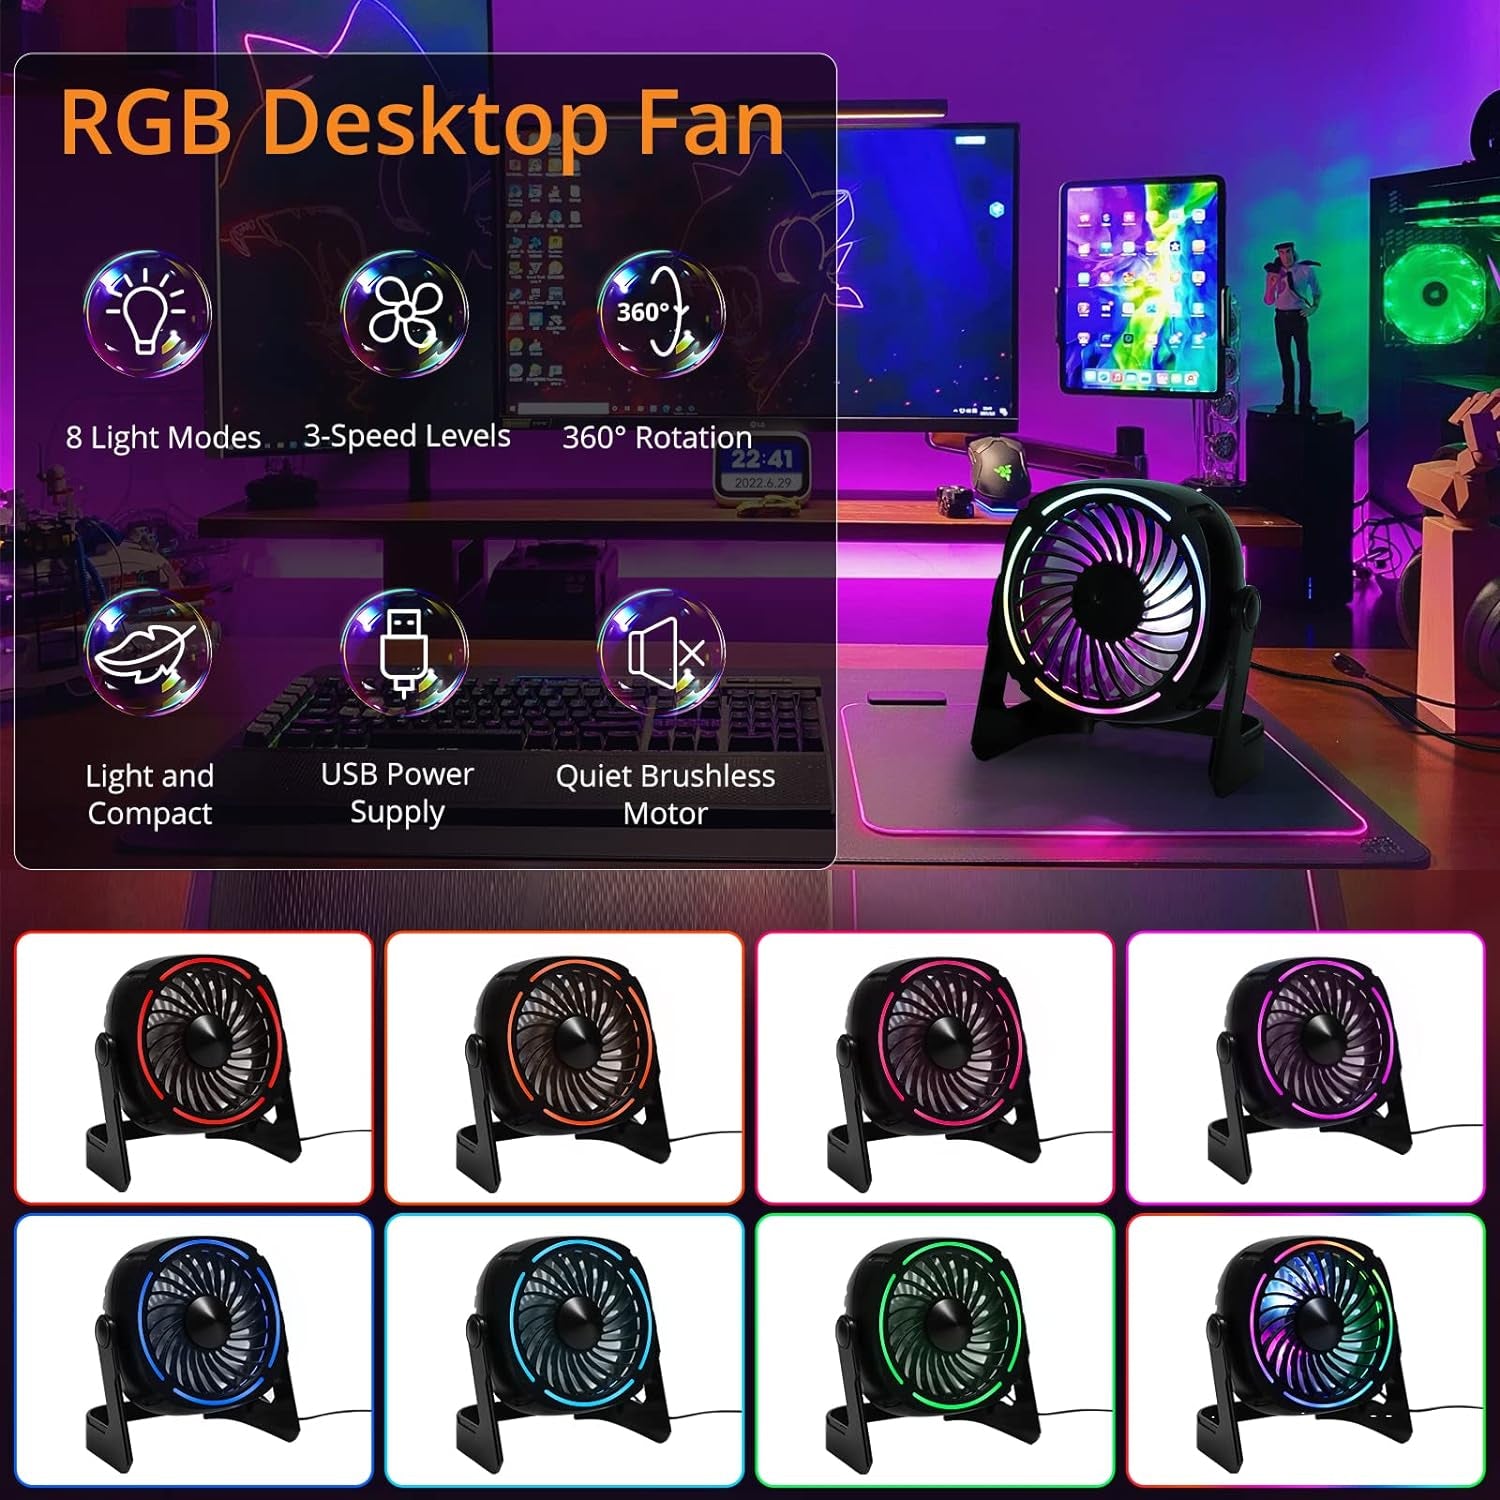 RGB Small USB Desk Fan, 6 Inch Small Fan with 8 Light Modes, Mini USB Fan with 3 Speeds, 60 Inch Cord, 360° Rotation, Quiet Operation, Portable Desk Fan for Rooms, Offices, Car, Travel